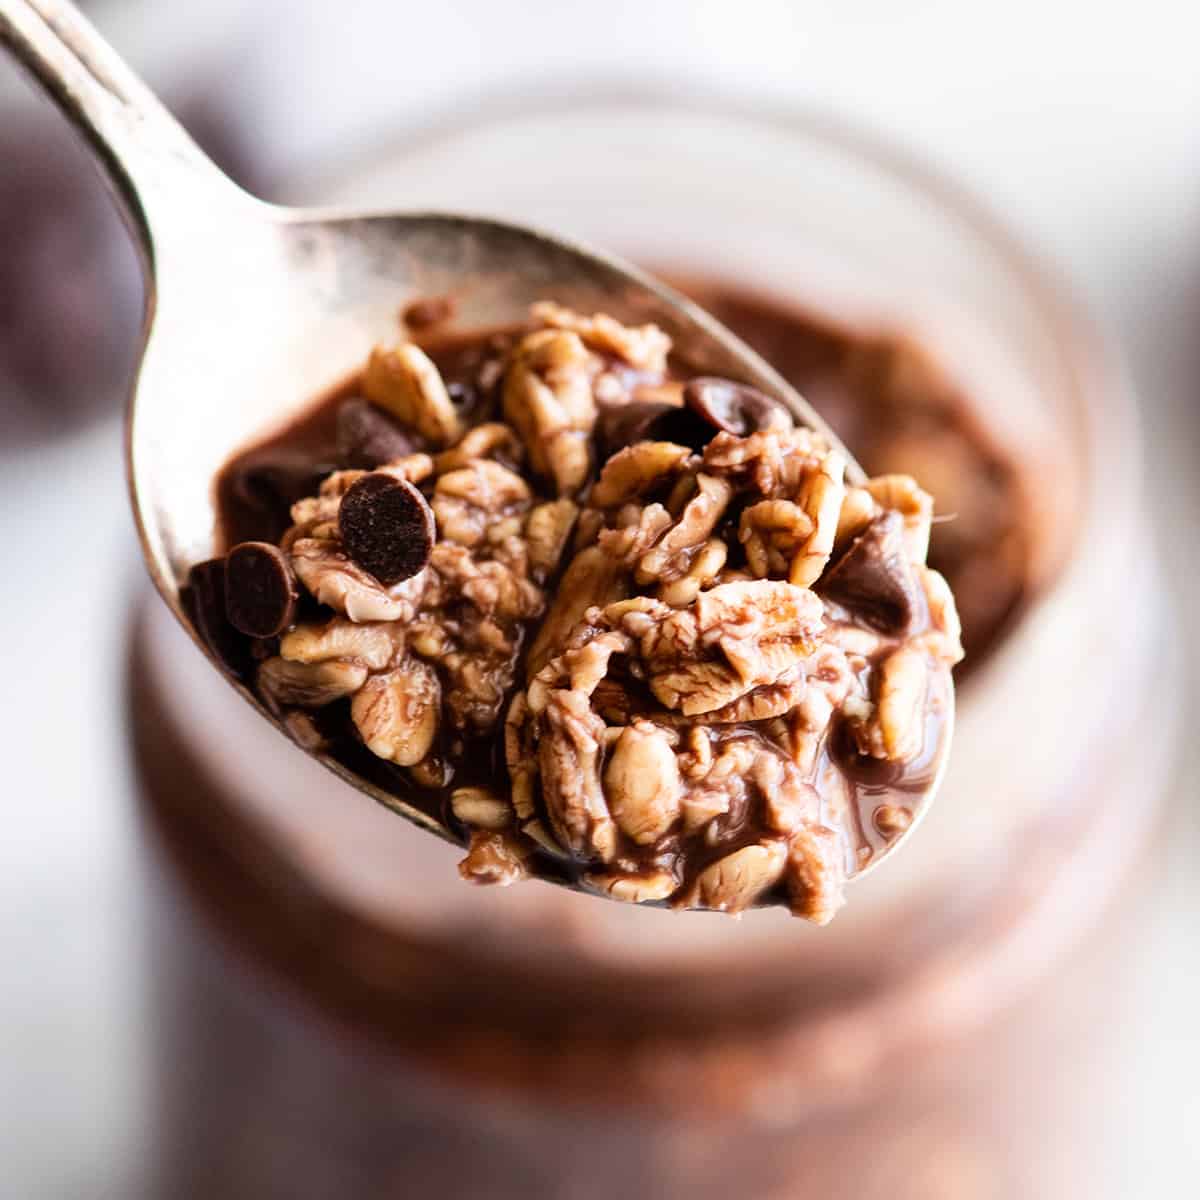 a bite of chocolate overnight oats on a spoon